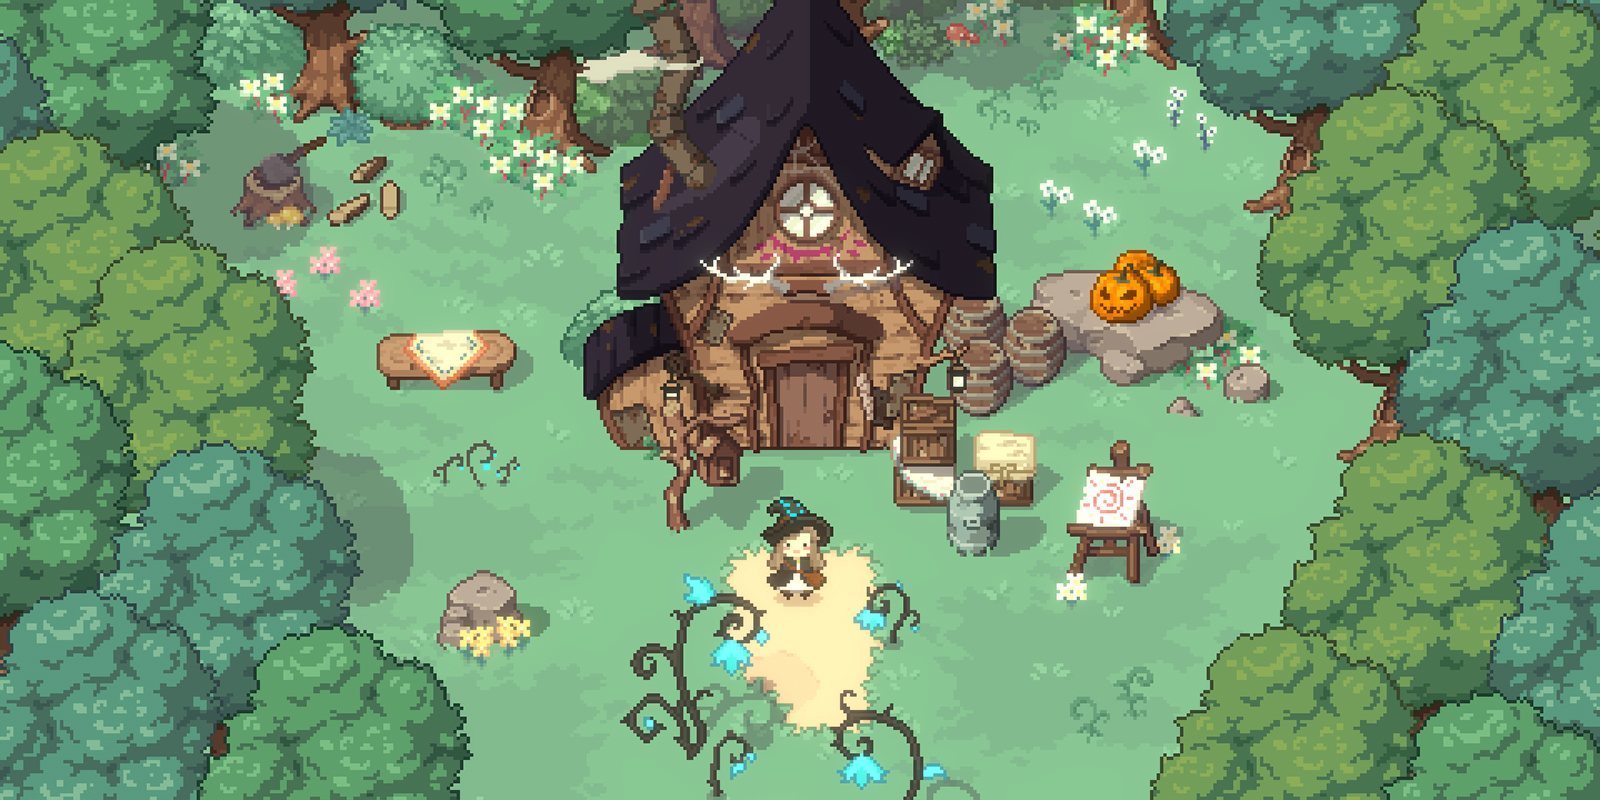 free download Little Witch in the Woods